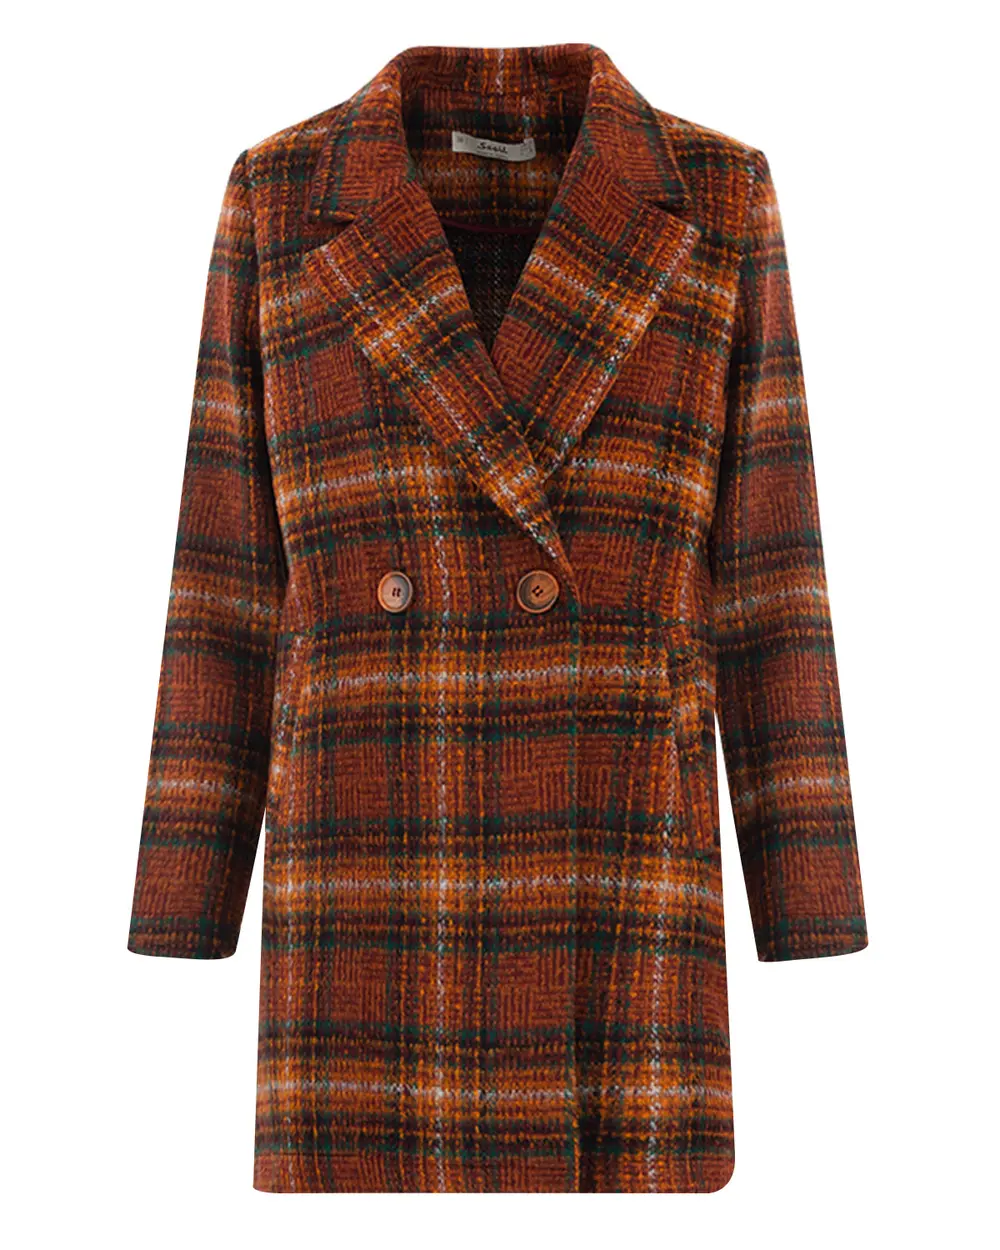 Checked Patterned Jacket Collar Coat